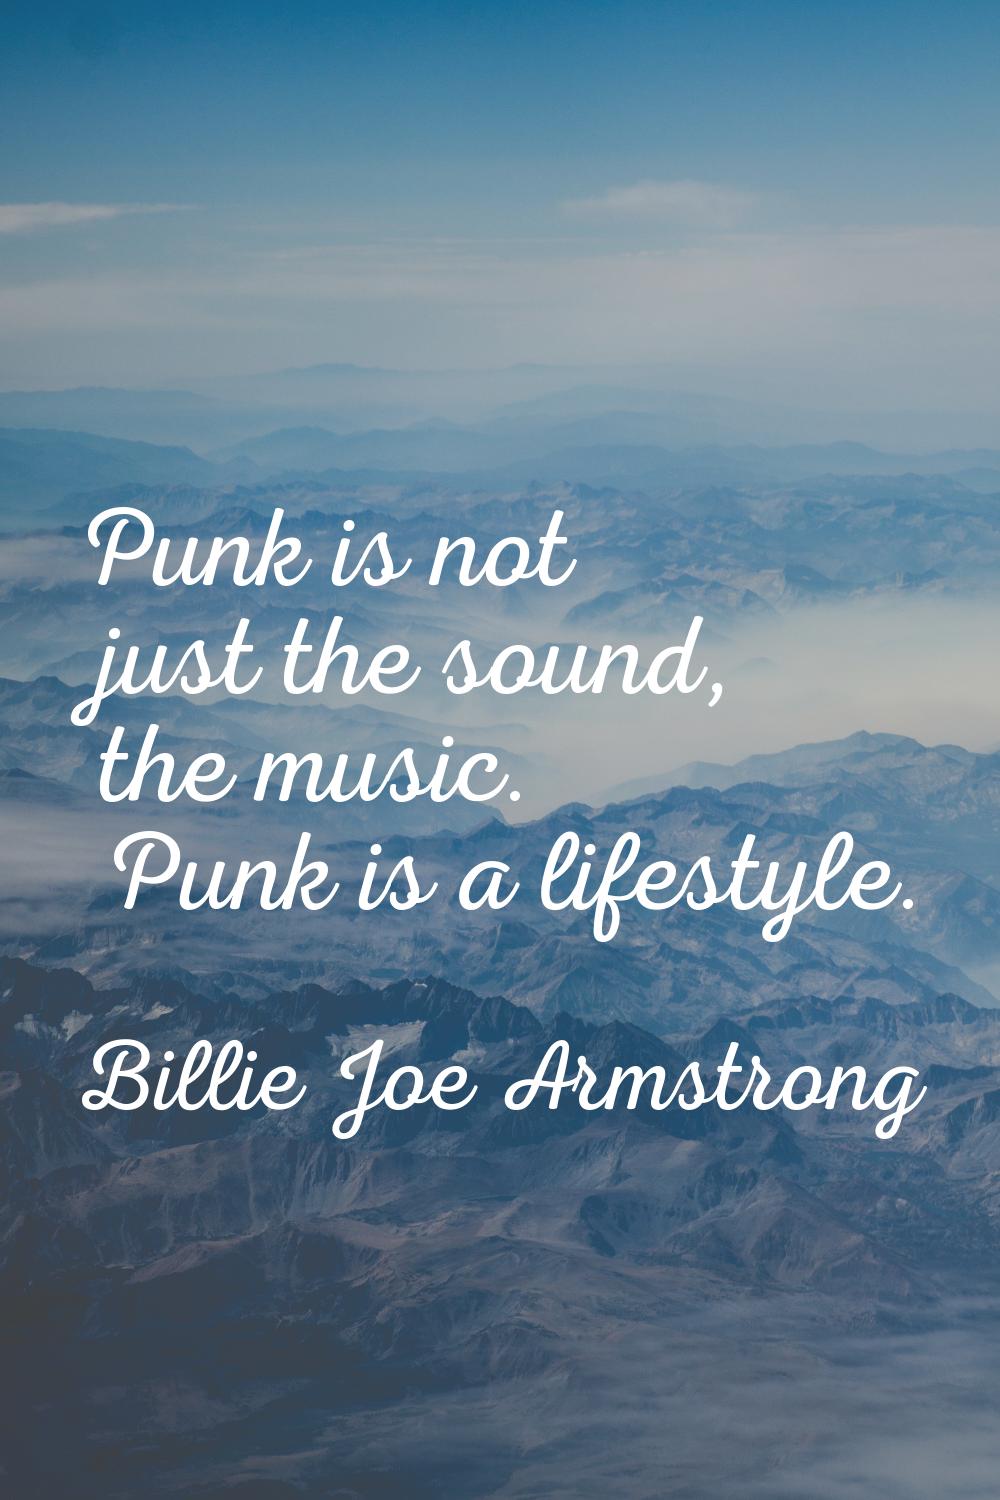 Punk is not just the sound, the music. Punk is a lifestyle.